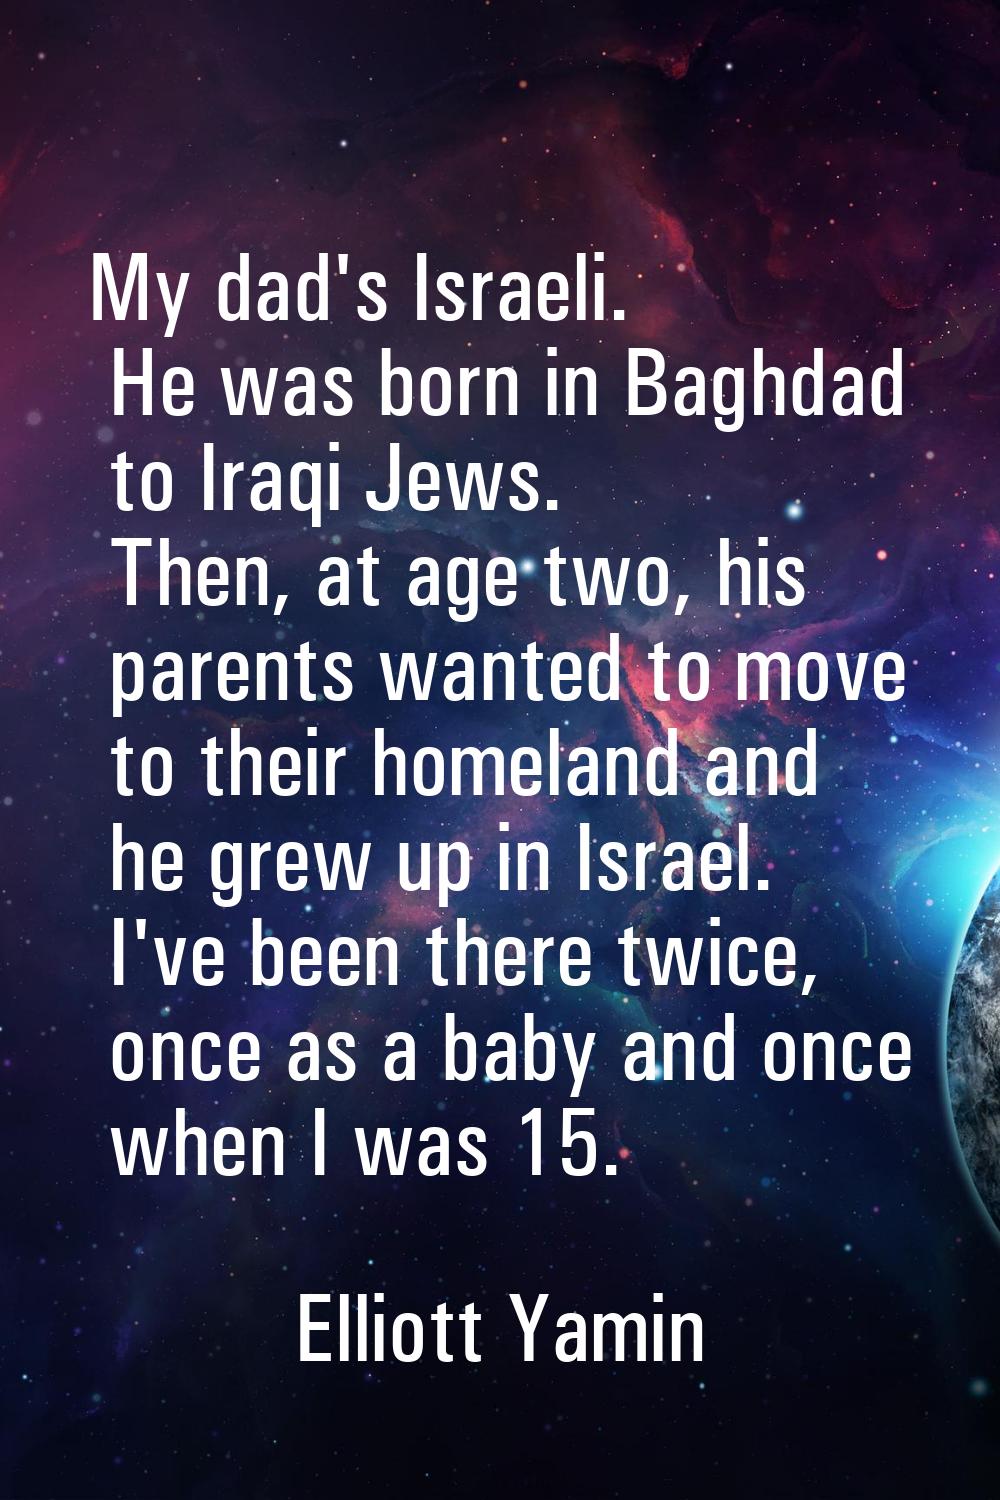 My dad's Israeli. He was born in Baghdad to Iraqi Jews. Then, at age two, his parents wanted to mov